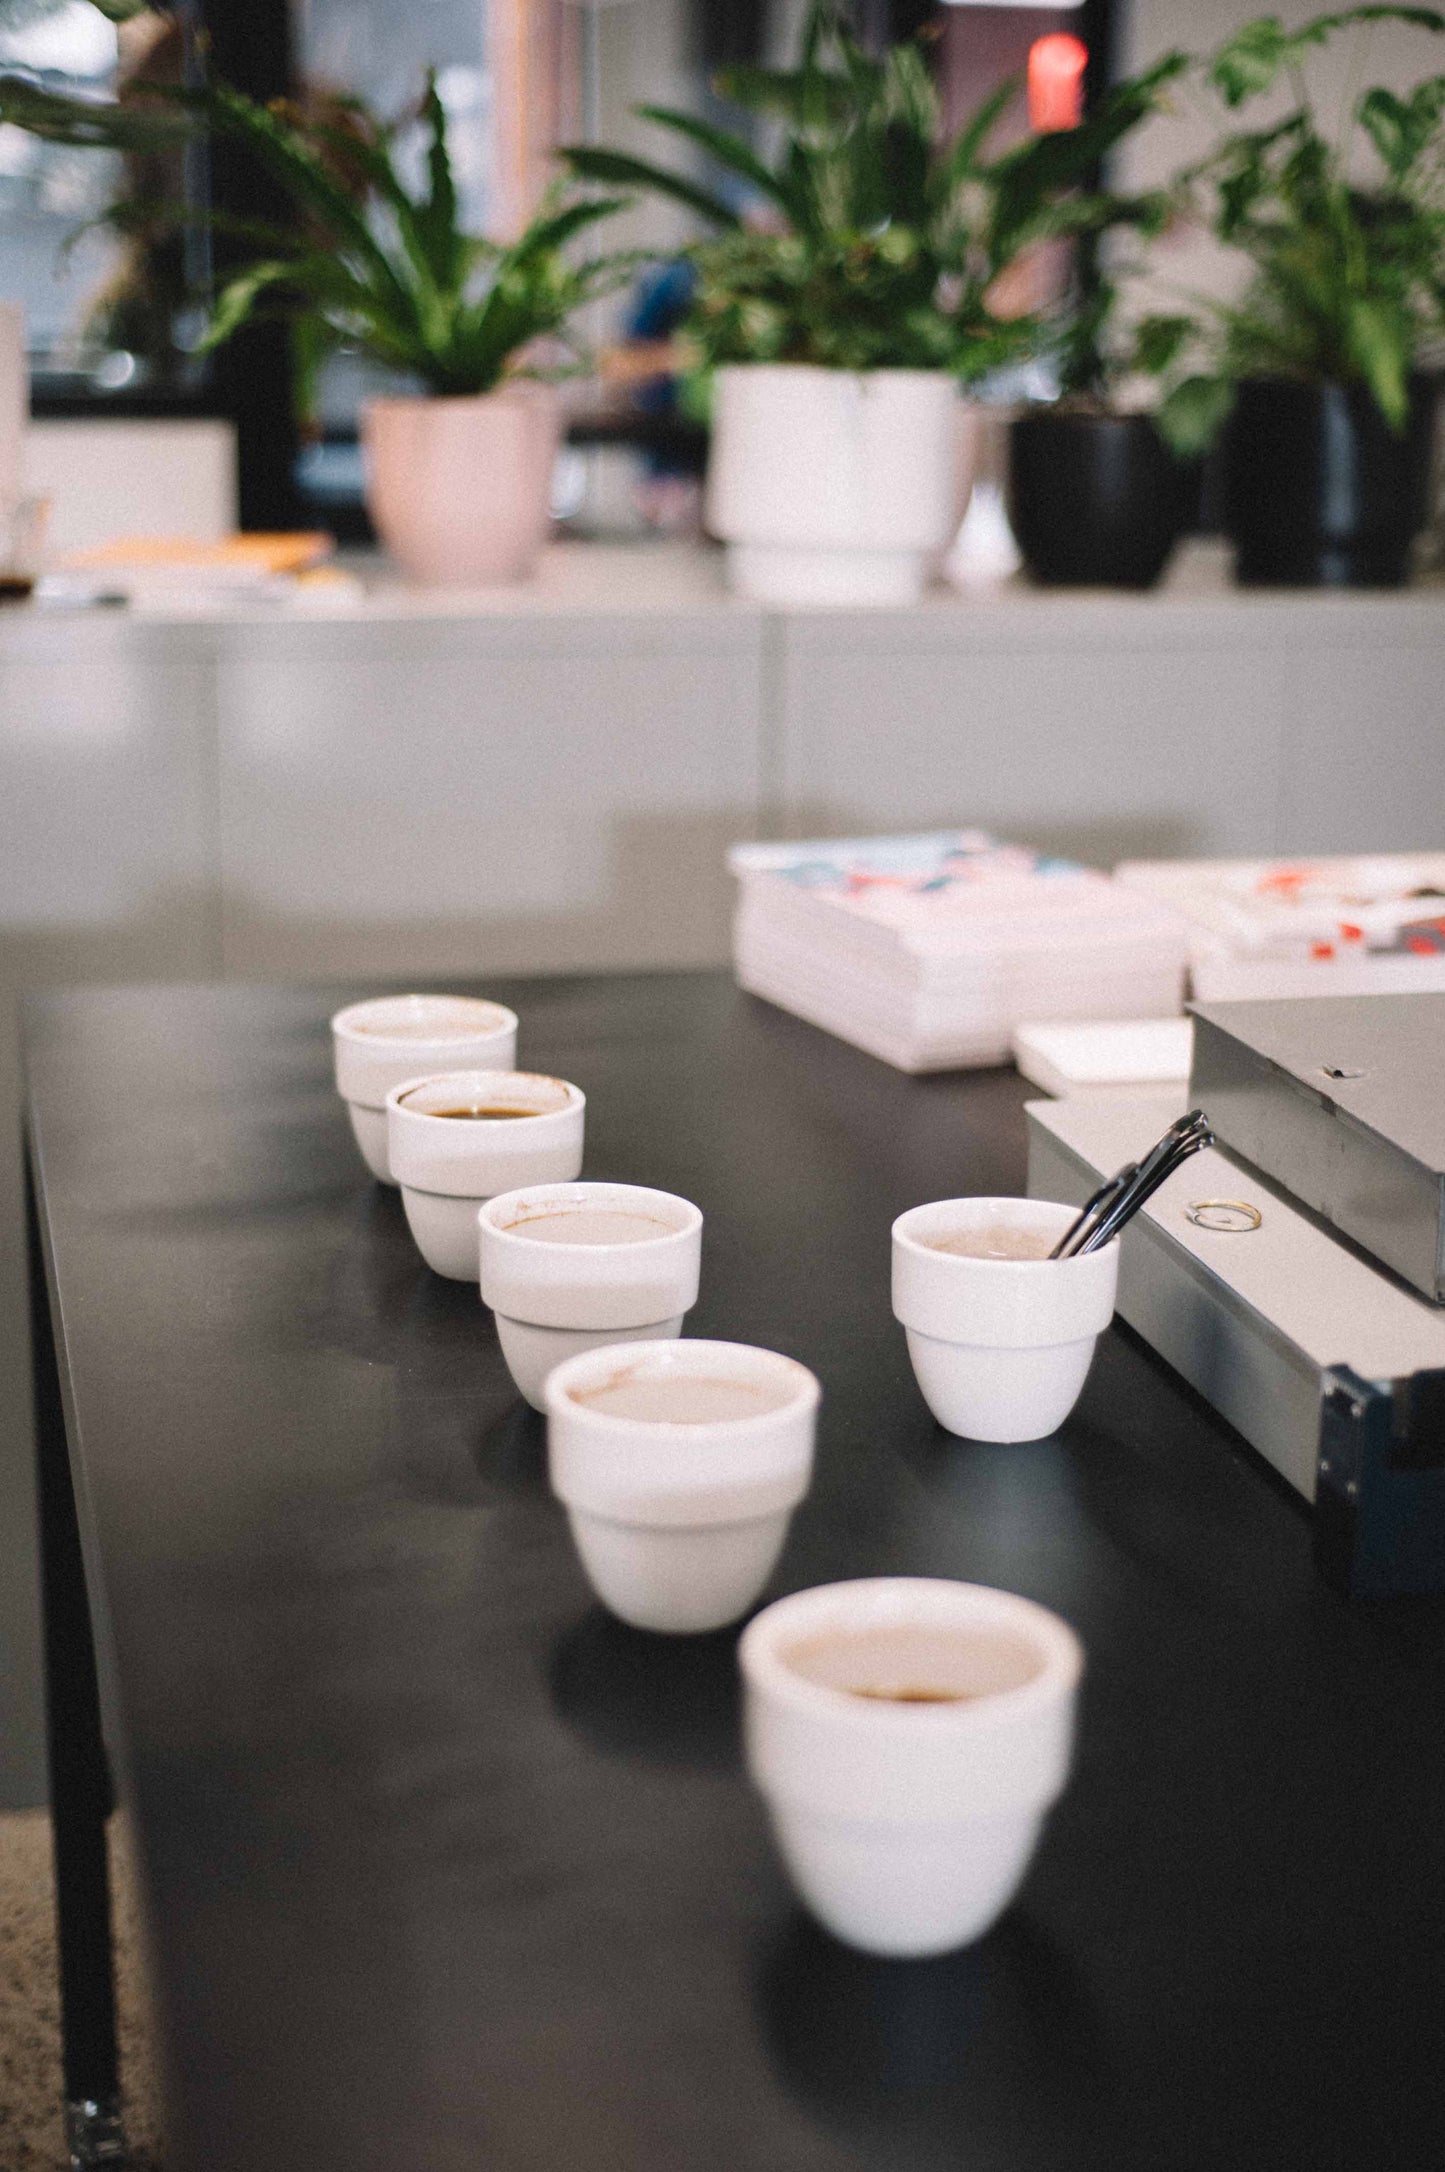 Monthly Cupping Series